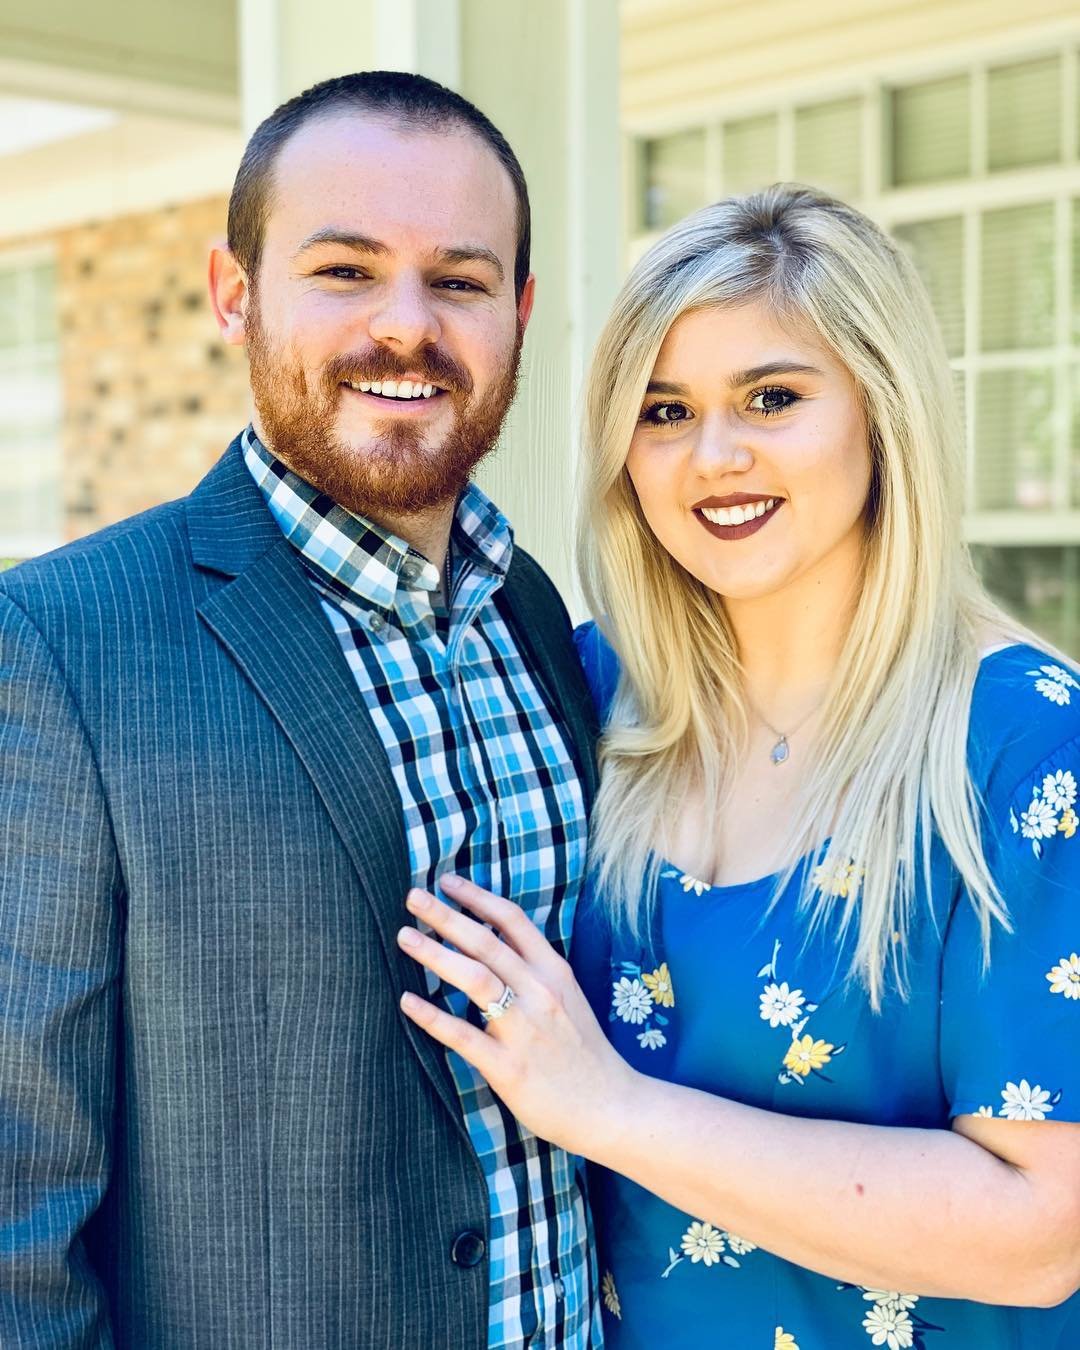 Pictured are Beaux Gipson, the new quarterbacks coach for the Gonzales Apaches, and his wife Christian, who he says has been “a phenomenal supporter throughout my coaching career.”